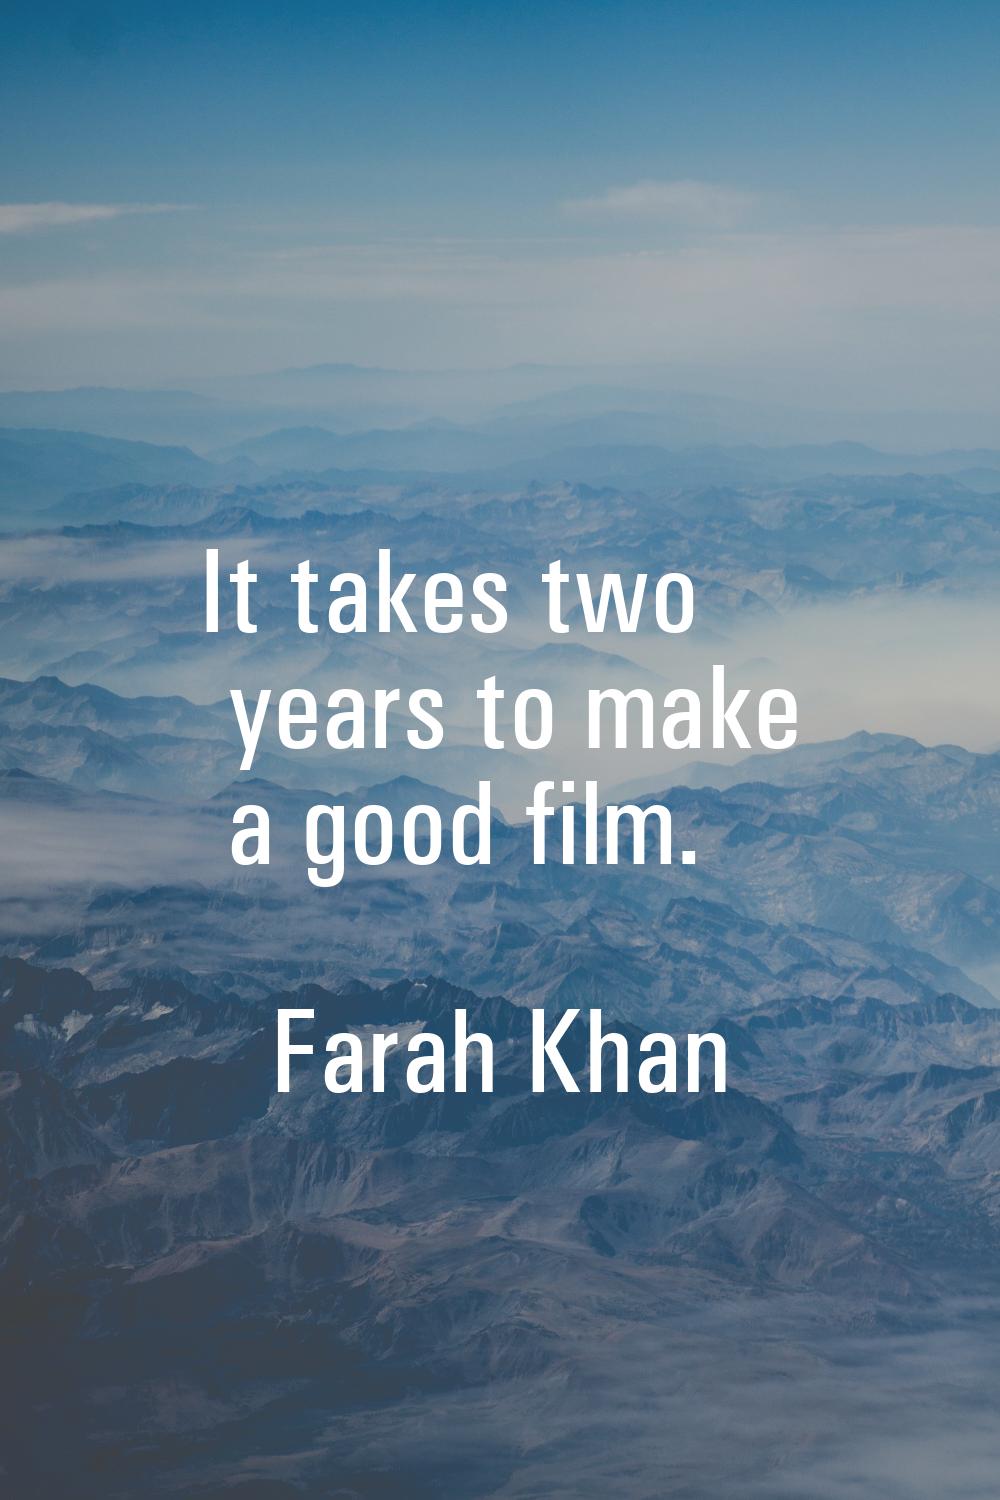 It takes two years to make a good film.